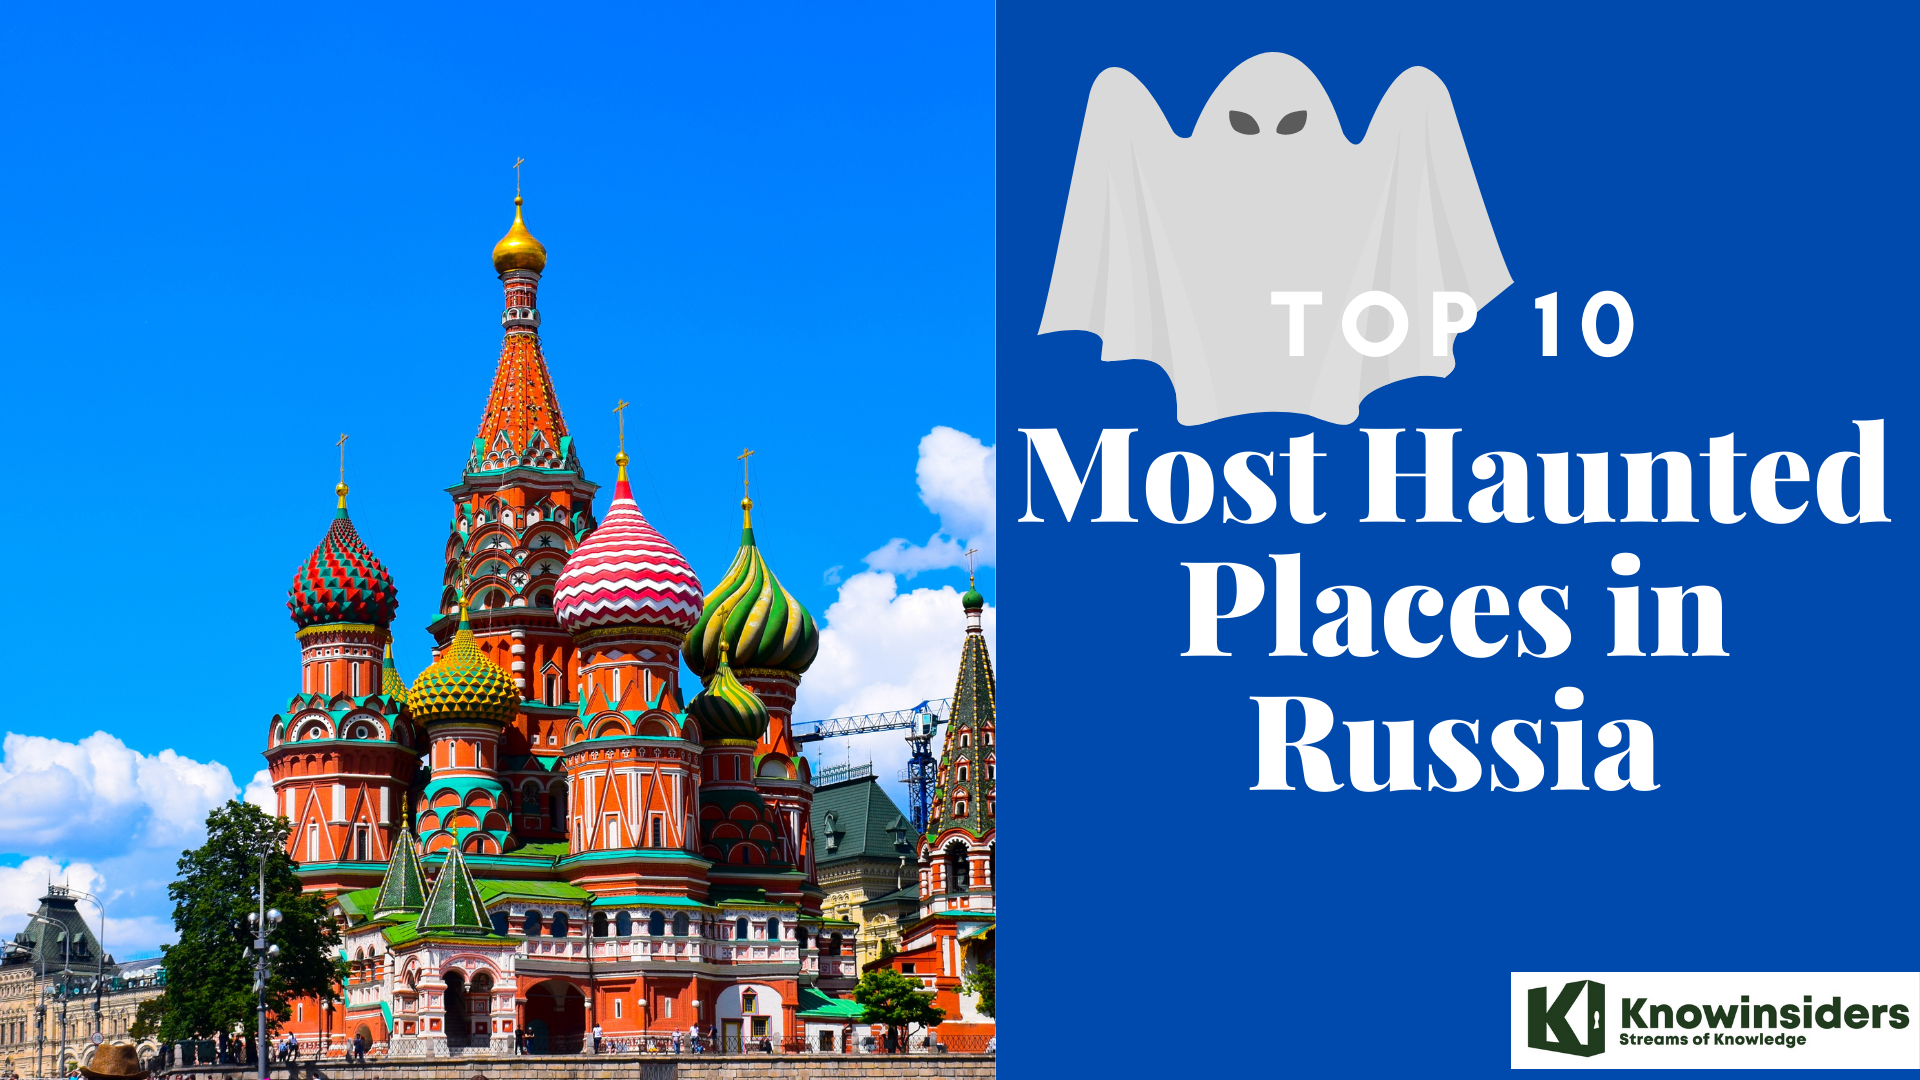 Top 10 Most Haunted & Ghost Places in Russia